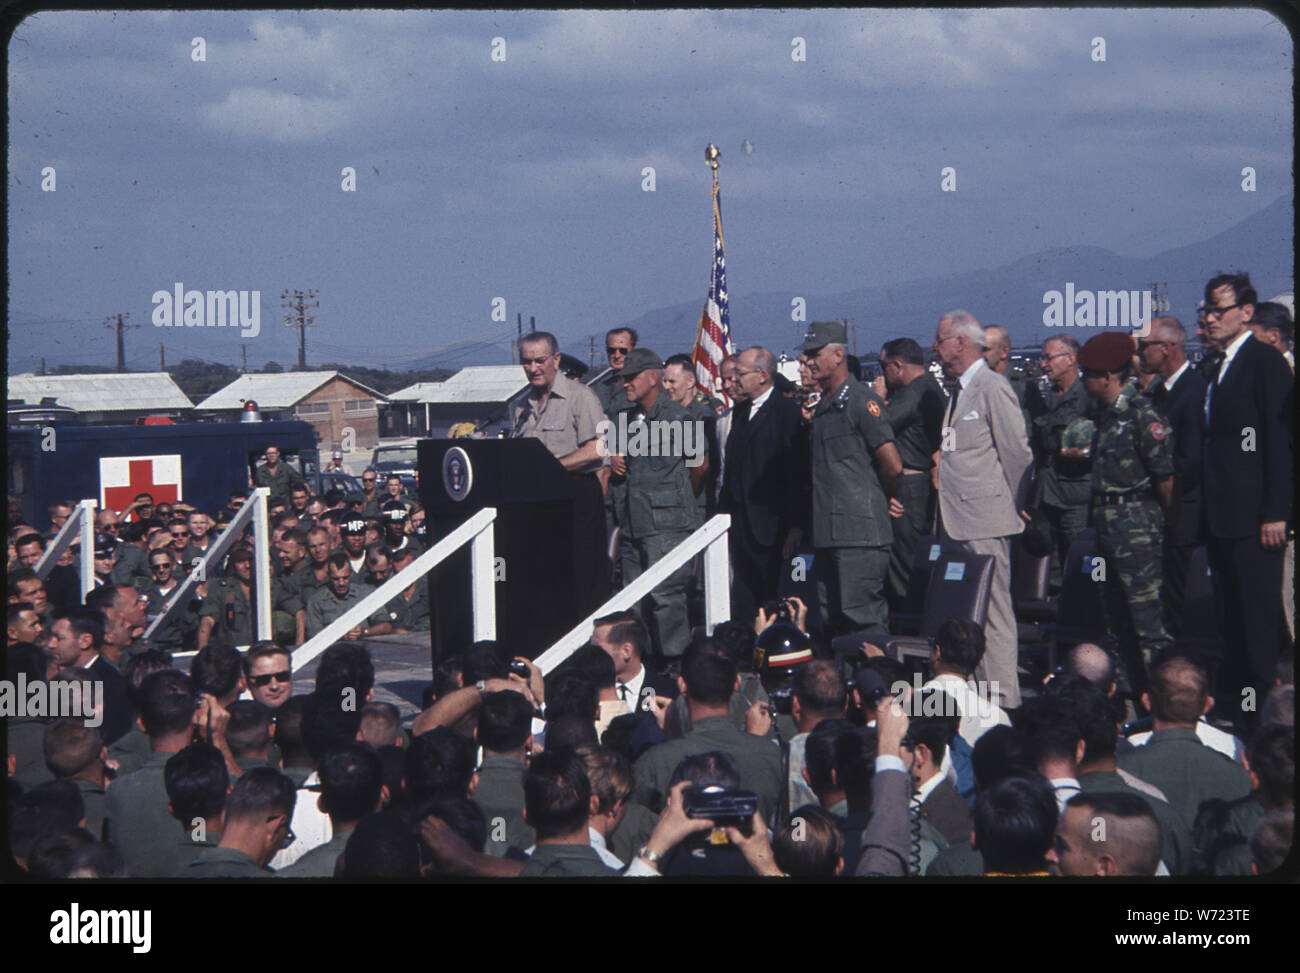 Cam Rahn Bay, Republic of Vietnam...President of the United States, Lyndon B. Johnson, Addresses U.S. Troops During a visit to Cam Ranh Bay. Attending the ceremony are Rear Admiral Kenneth L. Veth, U.S. Navy (second from left), commander U.S. Naval Forces, Vietnam; General William C. Westmoreland, USA (second row, second from right), commander U.S. Military Assistance Command, Vietnam, and the Honorable Ellsworth Bunker, U.S. Ambassador to the Republic of Vietnam. Stock Photo